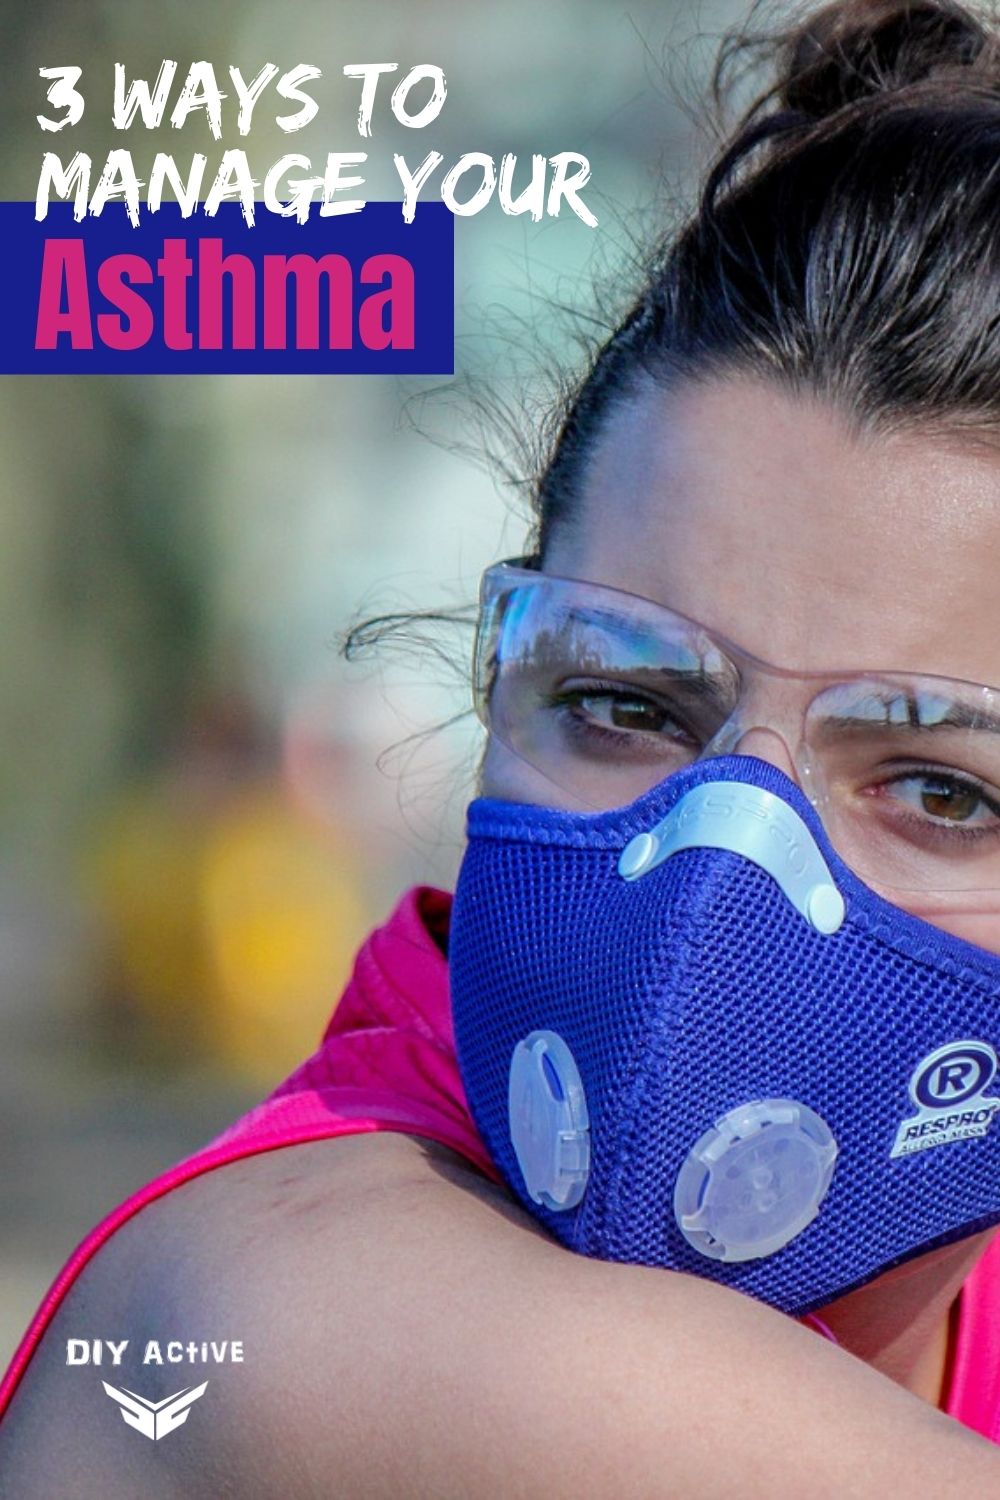 3 Ways to Manage Your Asthma